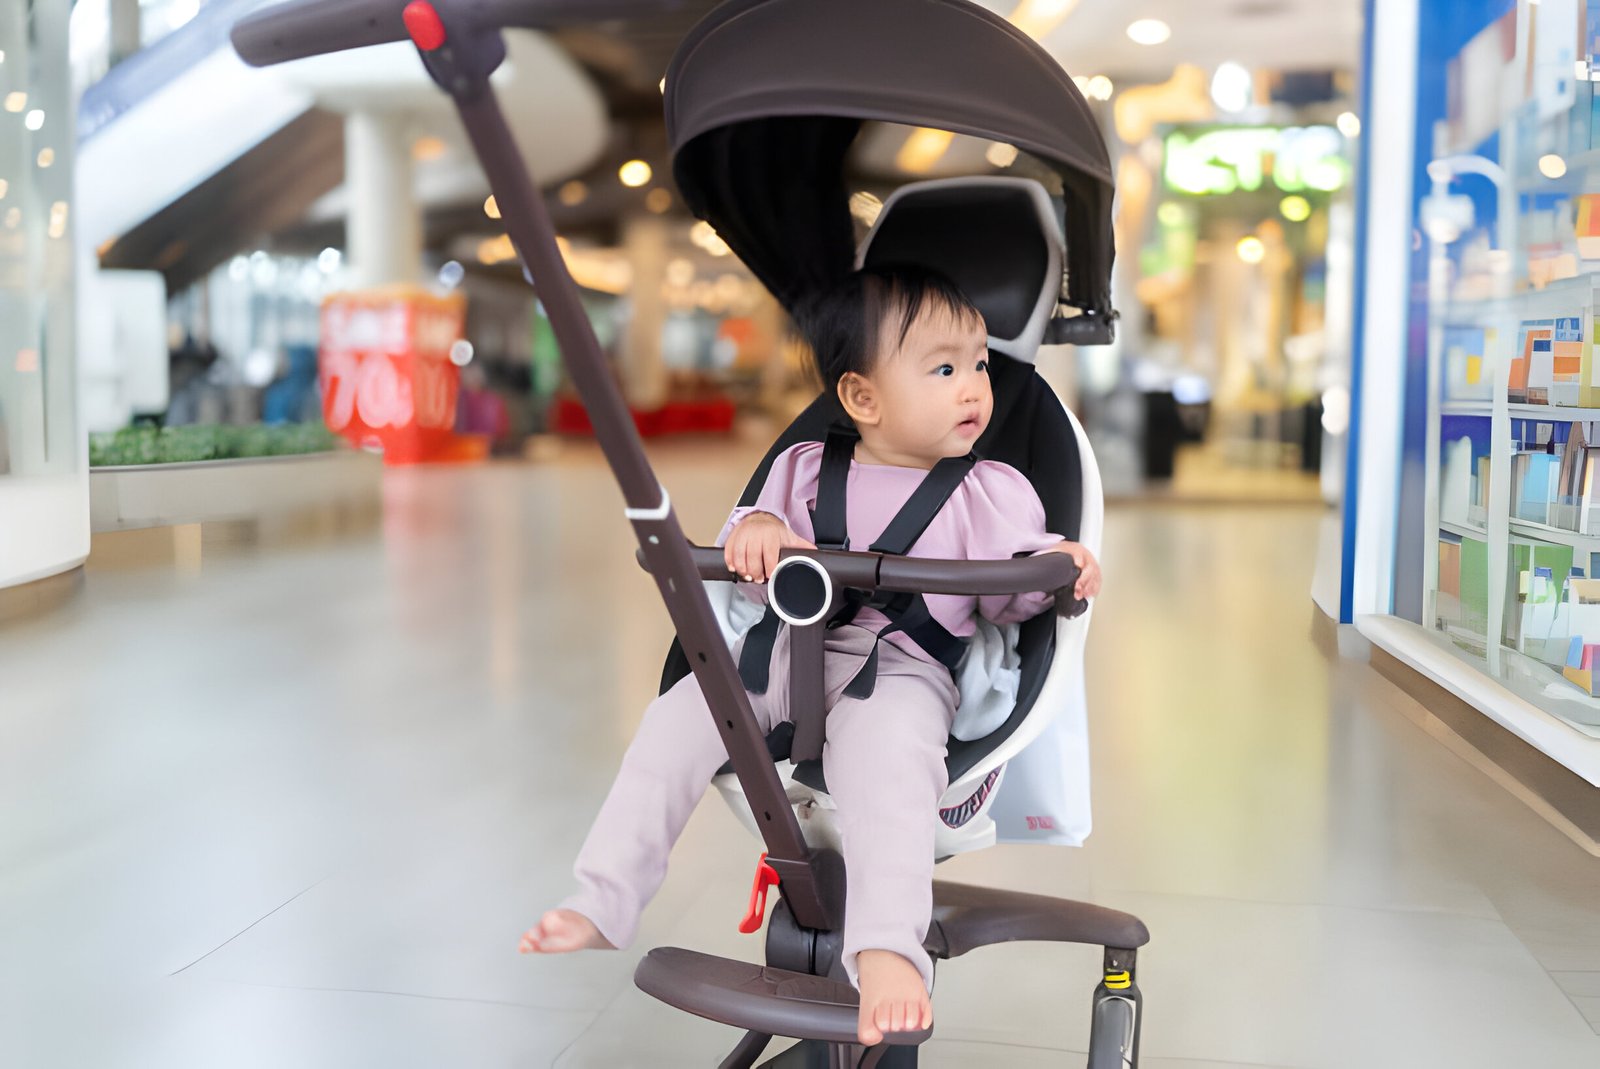 Top 7 Best Stroller Wagons for Every Family’s Needs